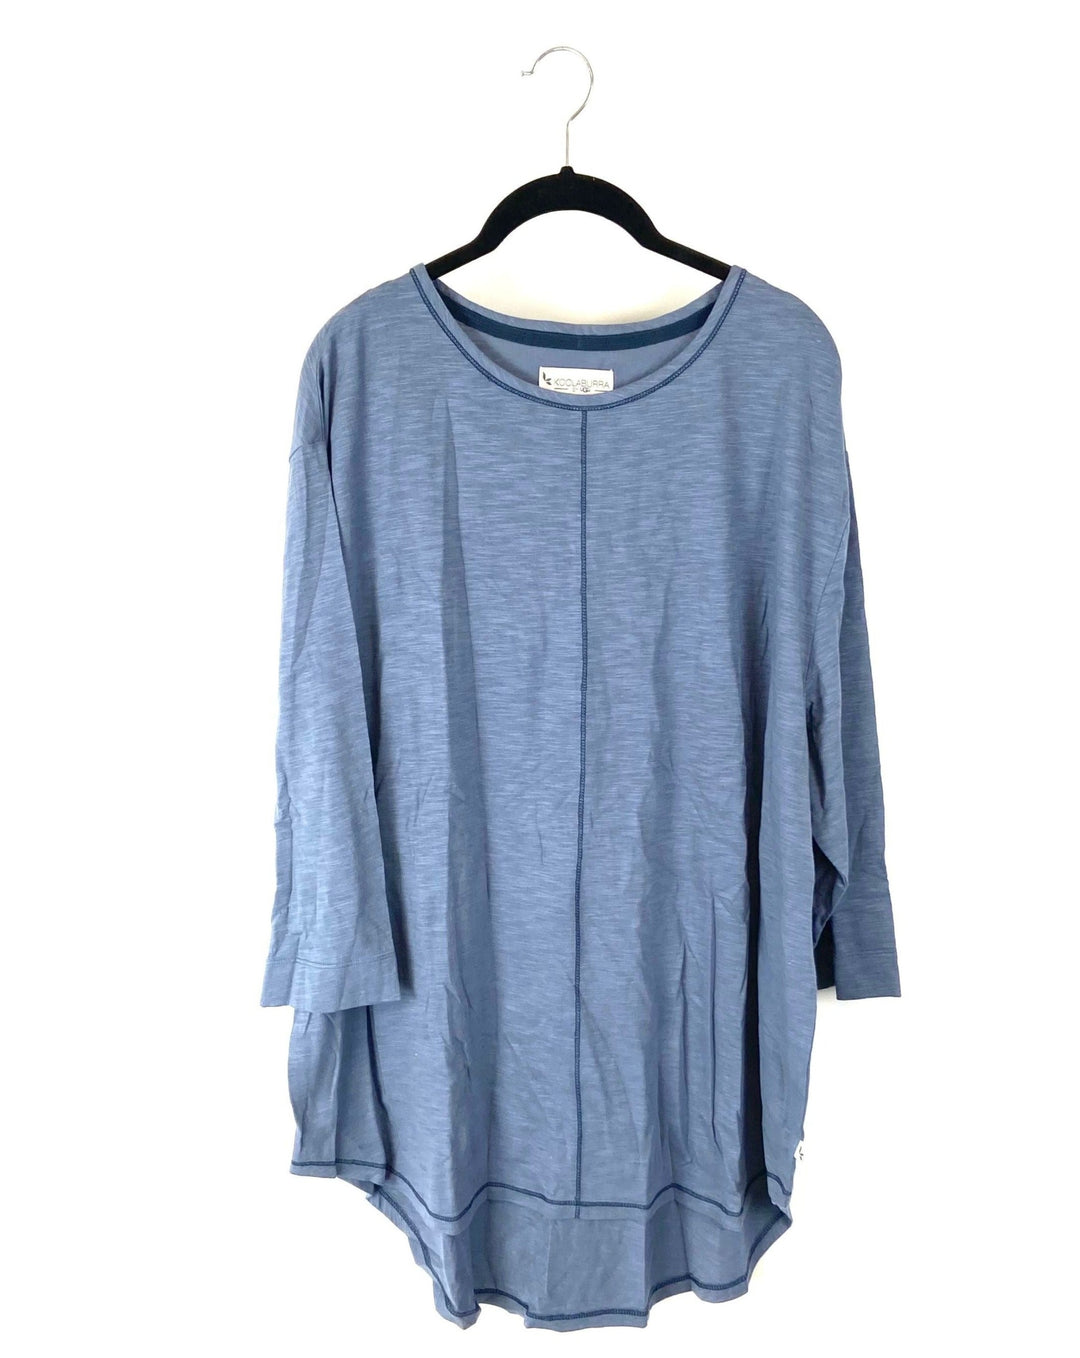 Blue/Grey Long Sleeve Top - Small